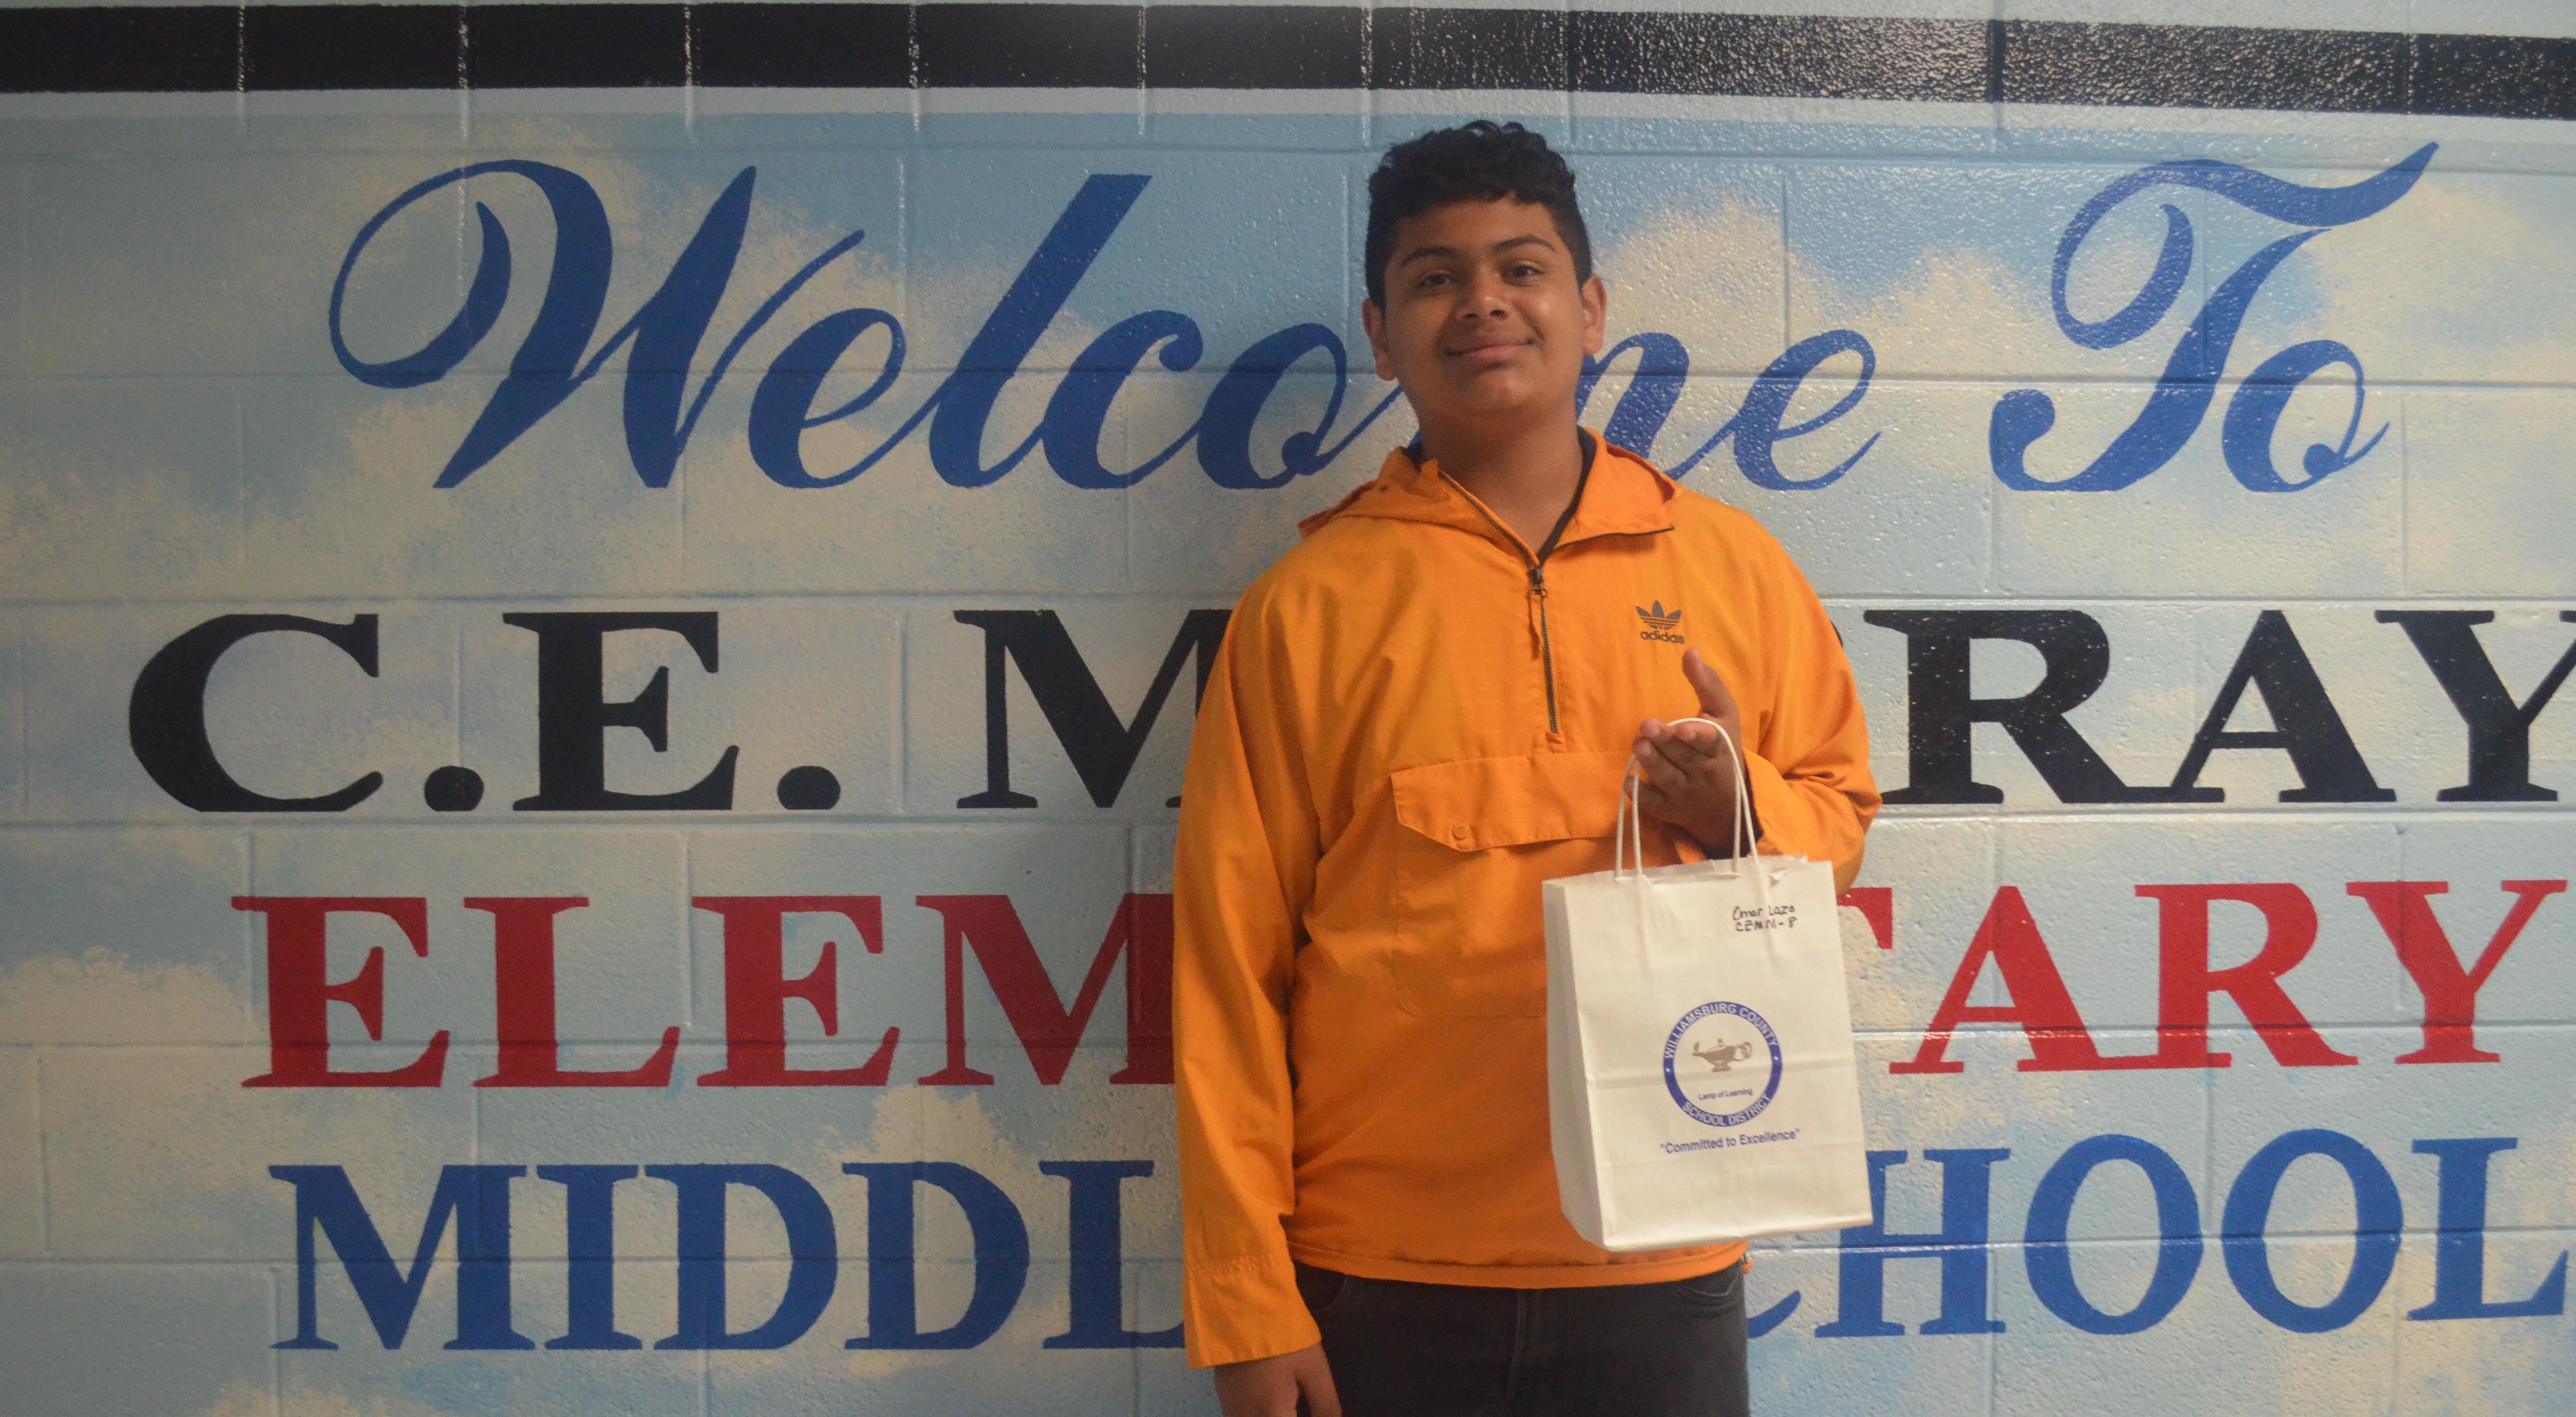 welcome to c.e. murray elementary middle school. student standing in front of wall mural holding gift bag